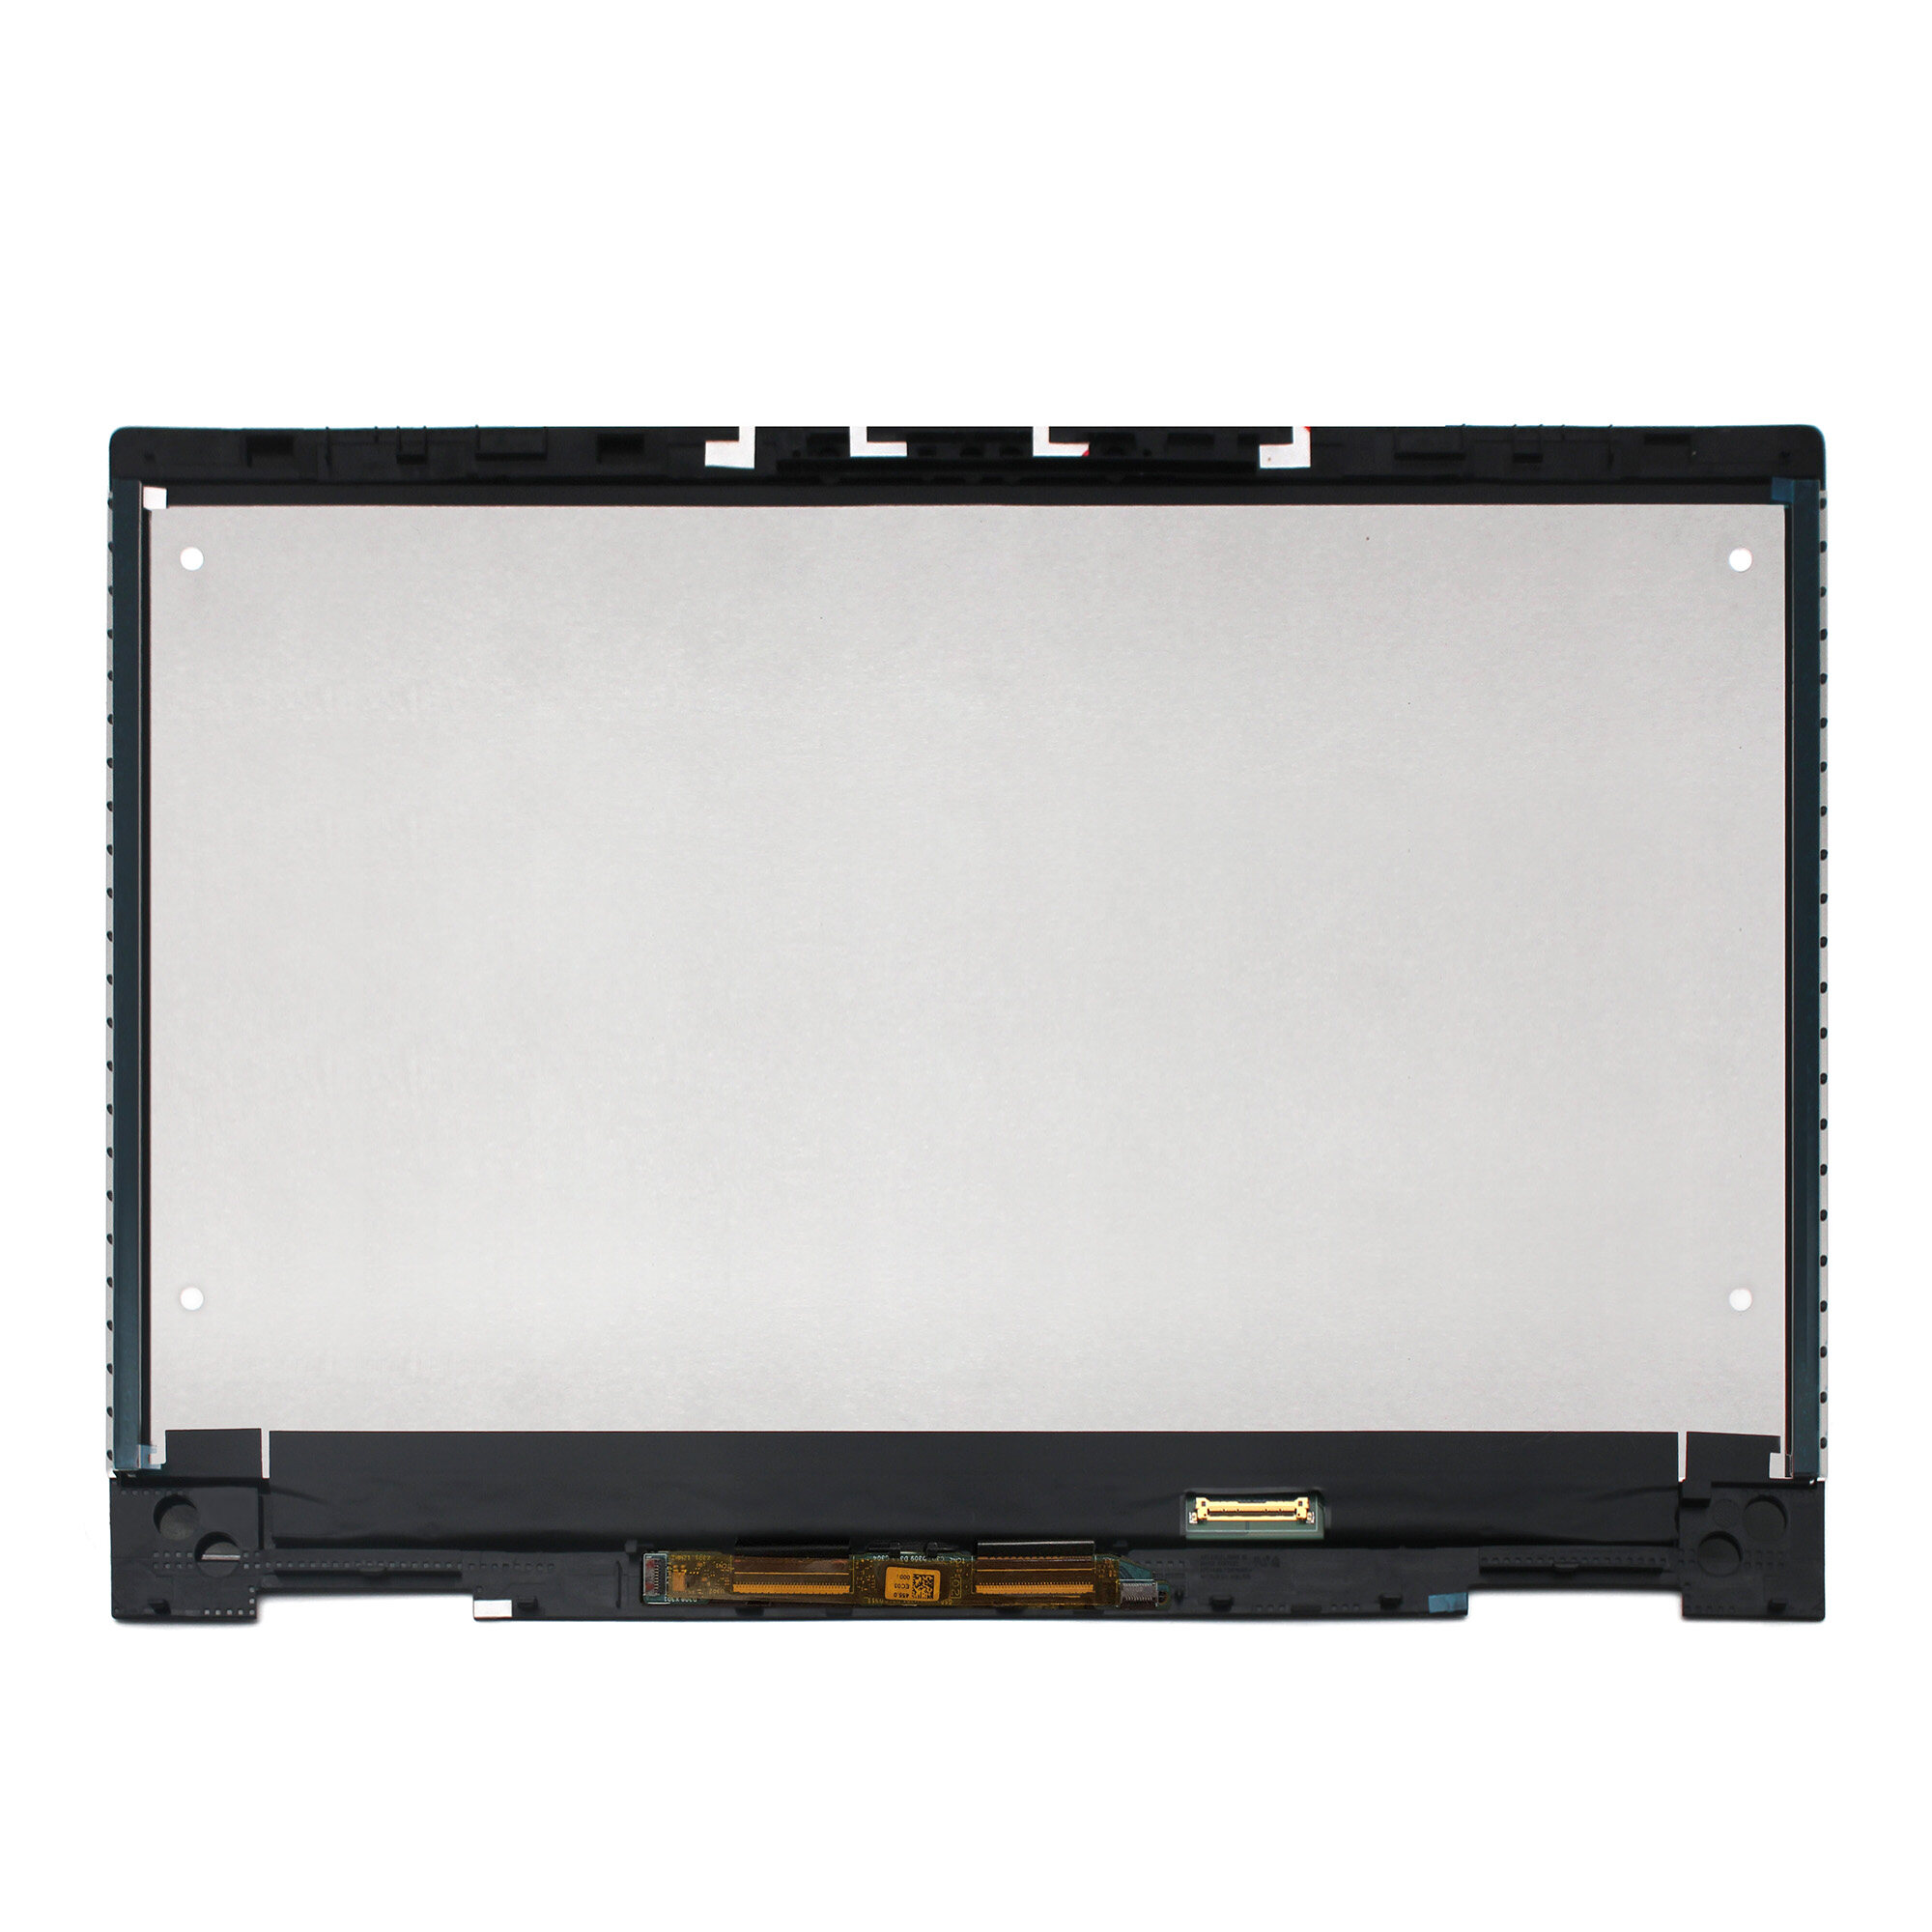 Kreplacement LCD Touch Screen Digitizer Assembly +Control Board+Frame For HP ENVY x360 13-ag0004nf 13-ag0004ng 13-ag0005ng 13ag0006nf